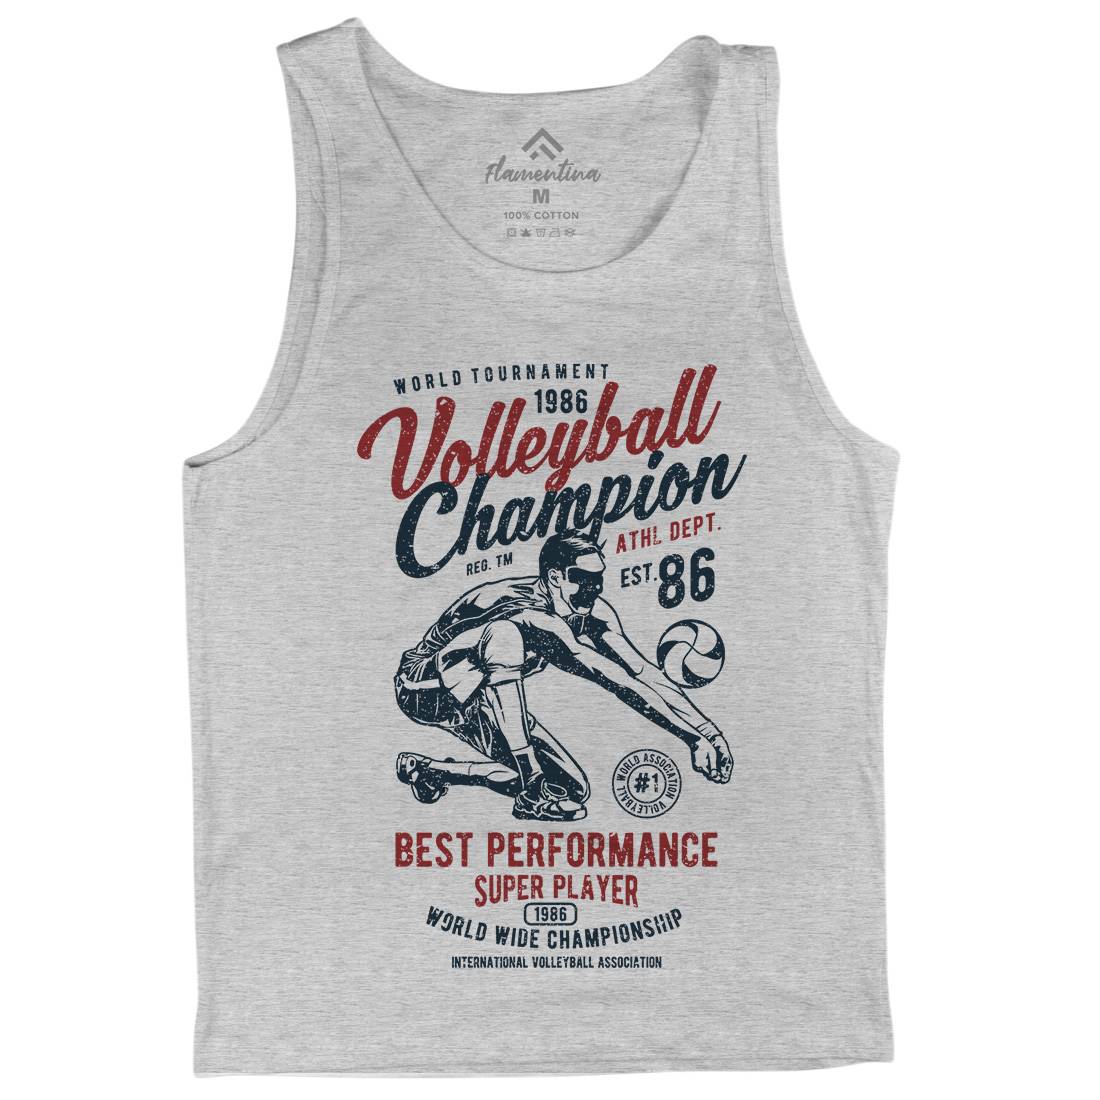 Volleyball Champion Mens Tank Top Vest Sport A789